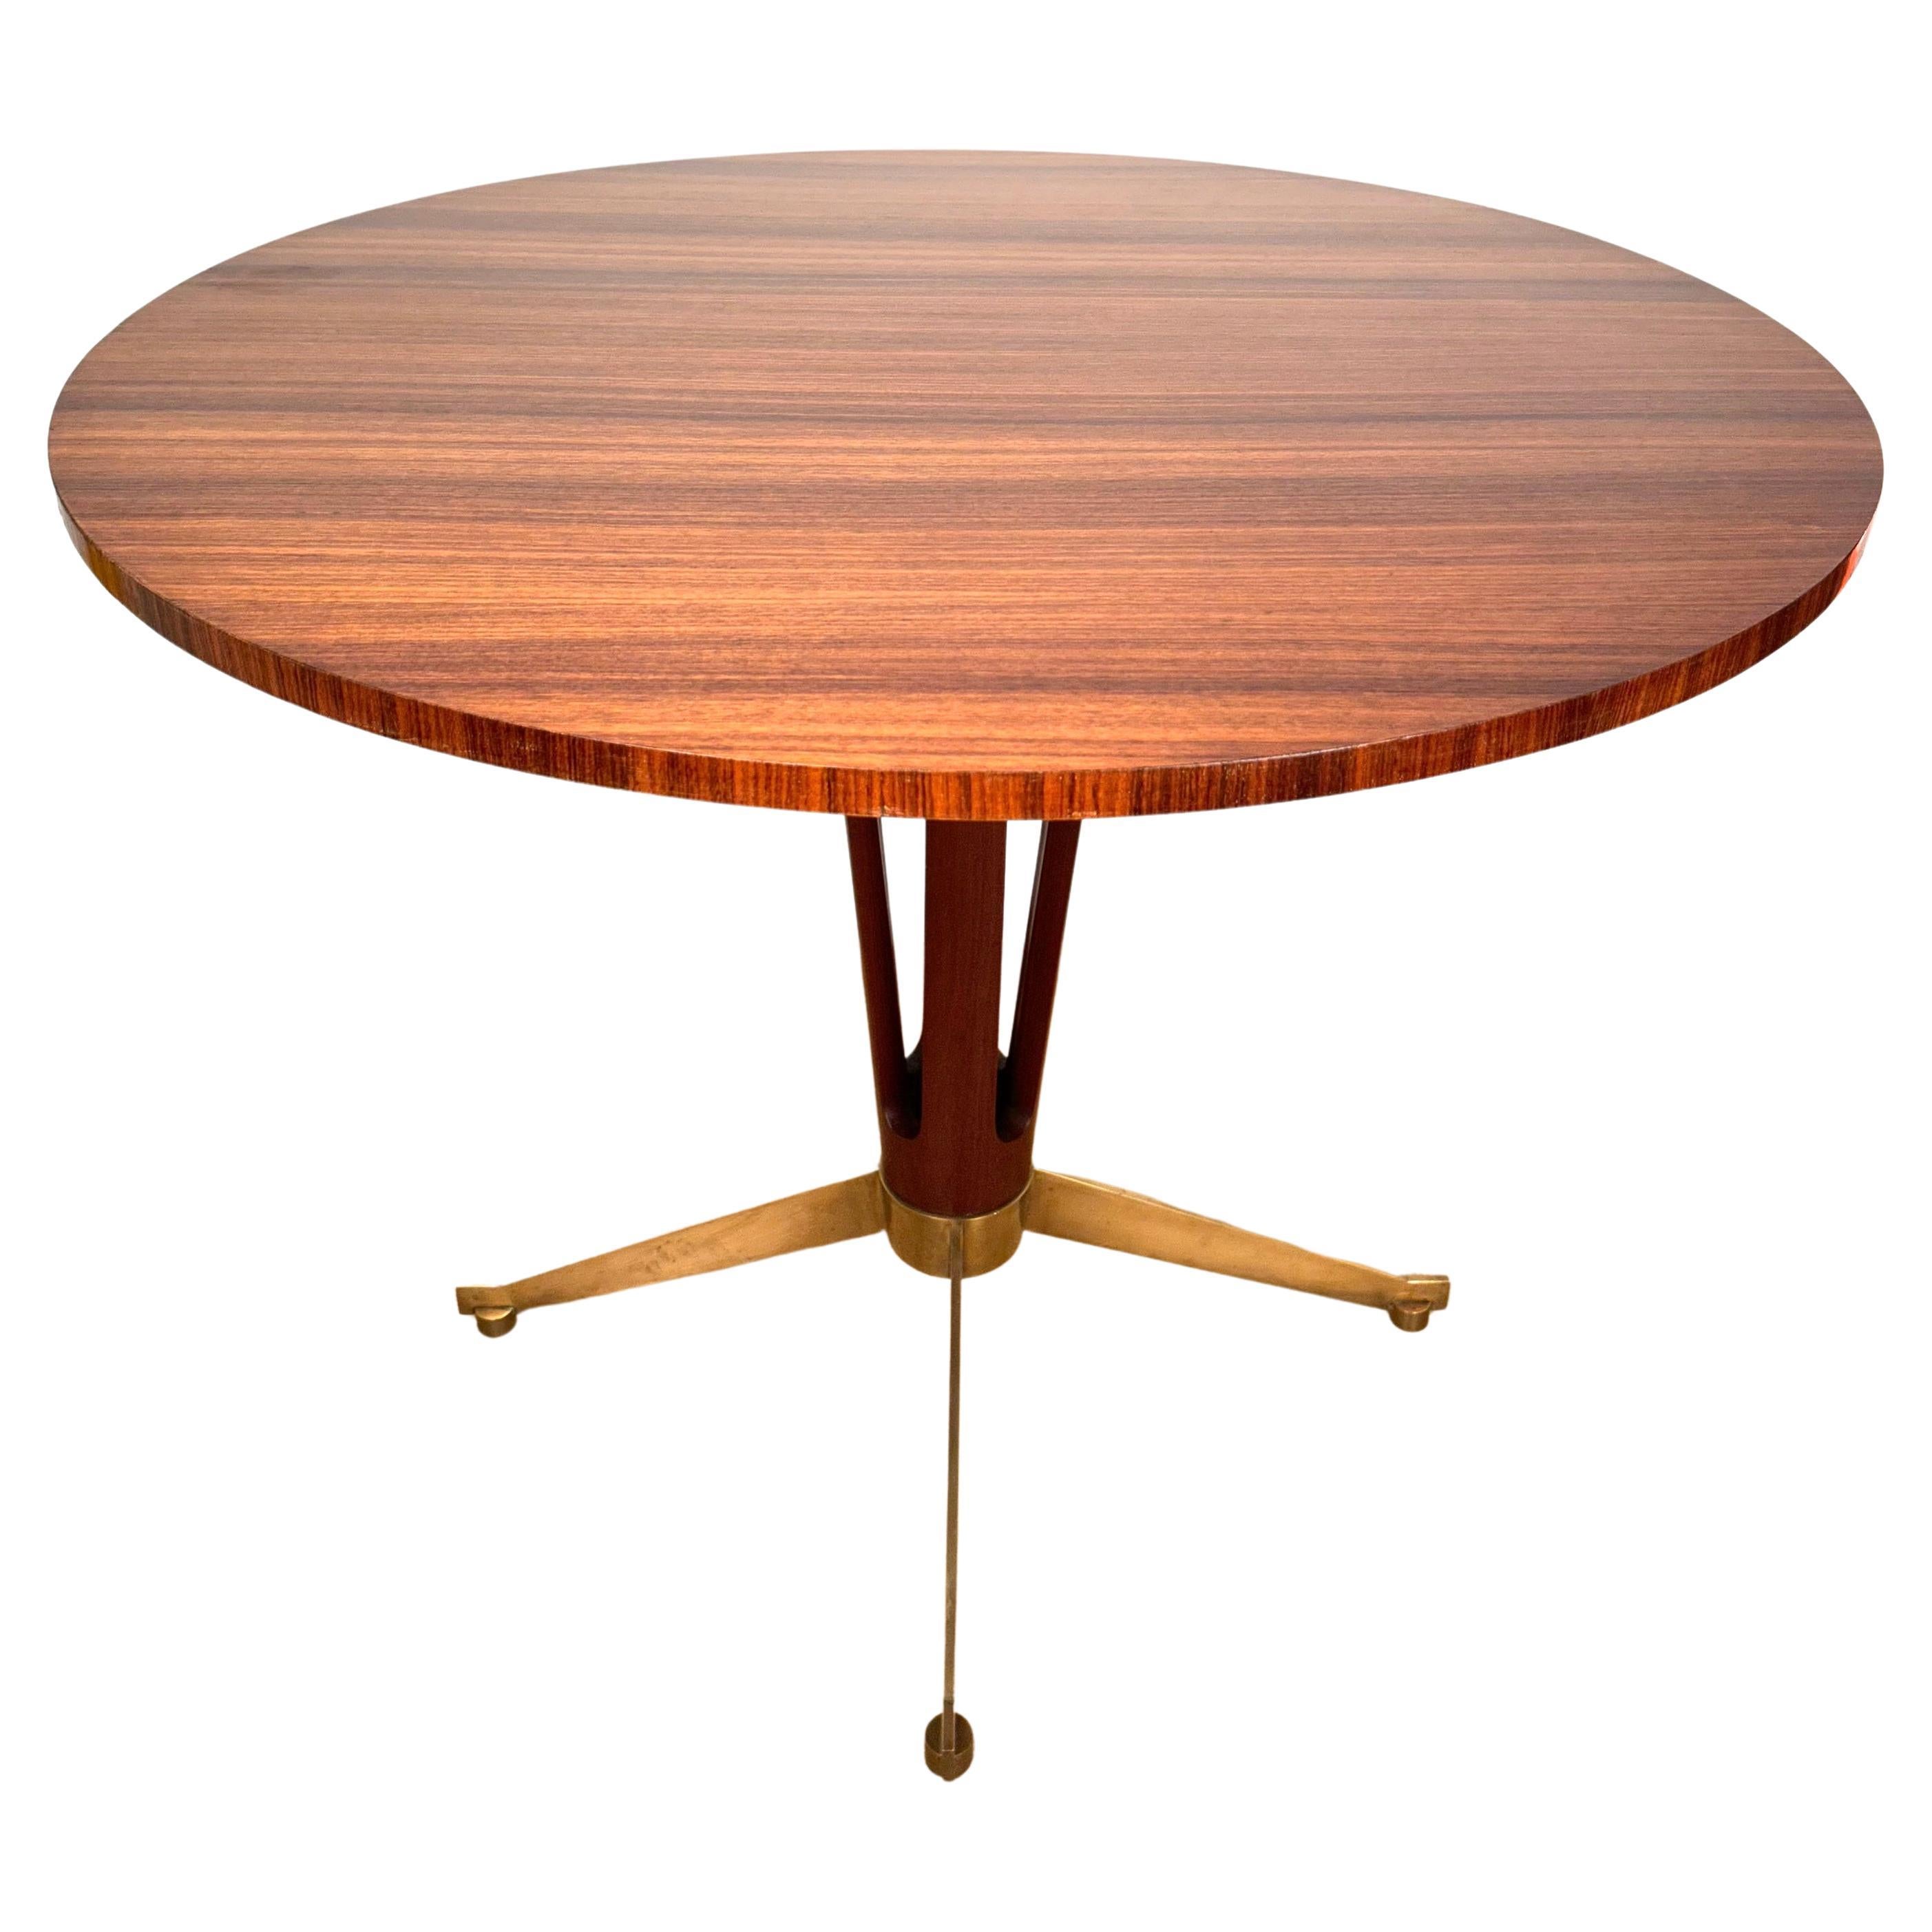 Italian Midcentury Circular Rosewood ans Brass Dining Table.1960 For Sale